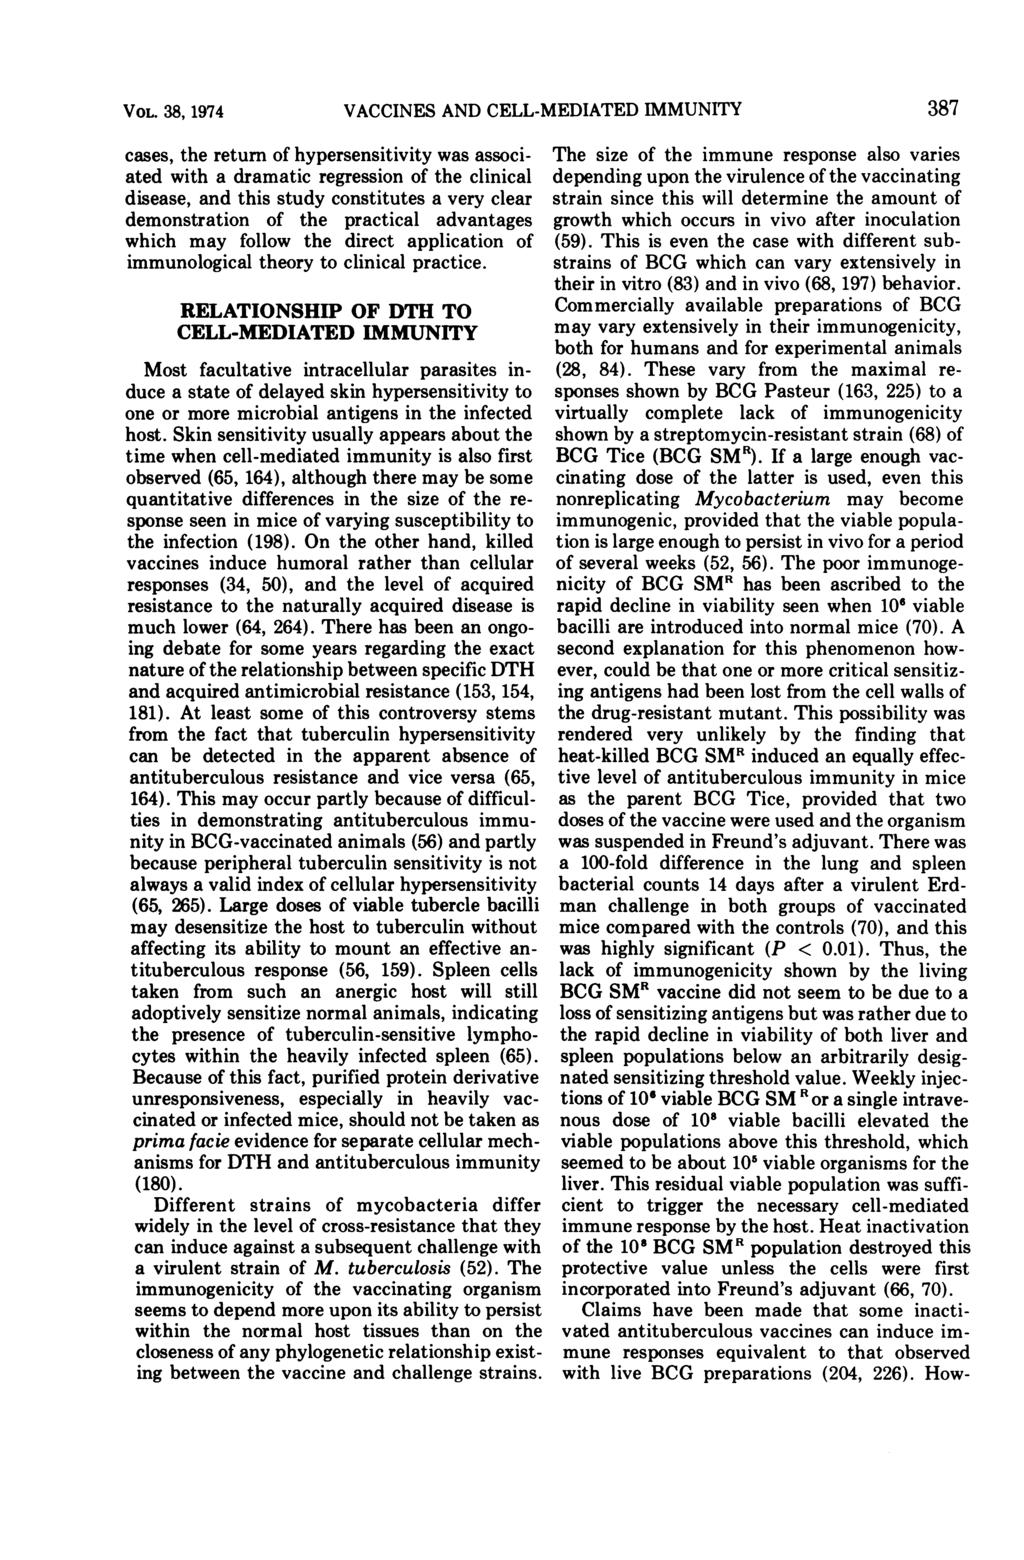 VOL. 38, 1974 cases, the return of hypersensitivity was associated with a dramatic regression of the clinical disease, and this study constitutes a very clear demonstration of the practical